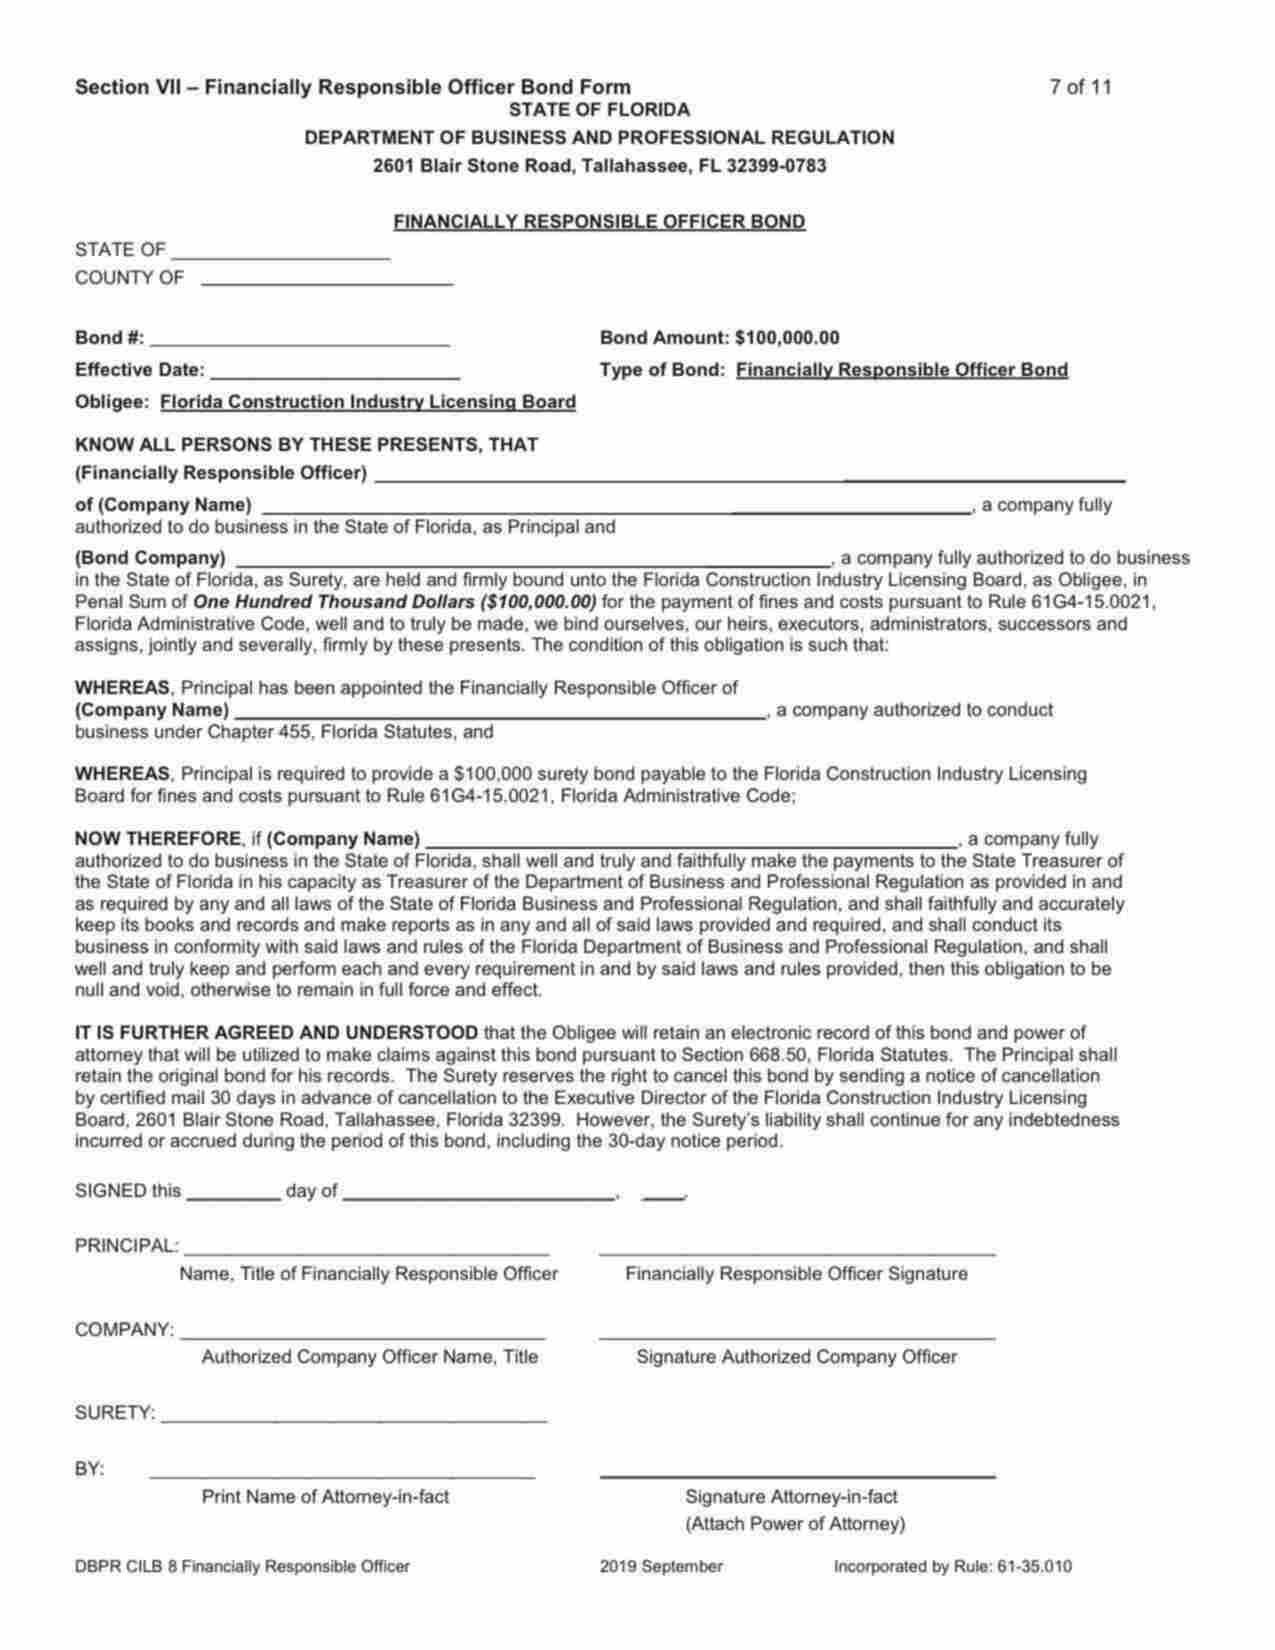 Florida Financially Responsible Officer (FRO) Bond Form